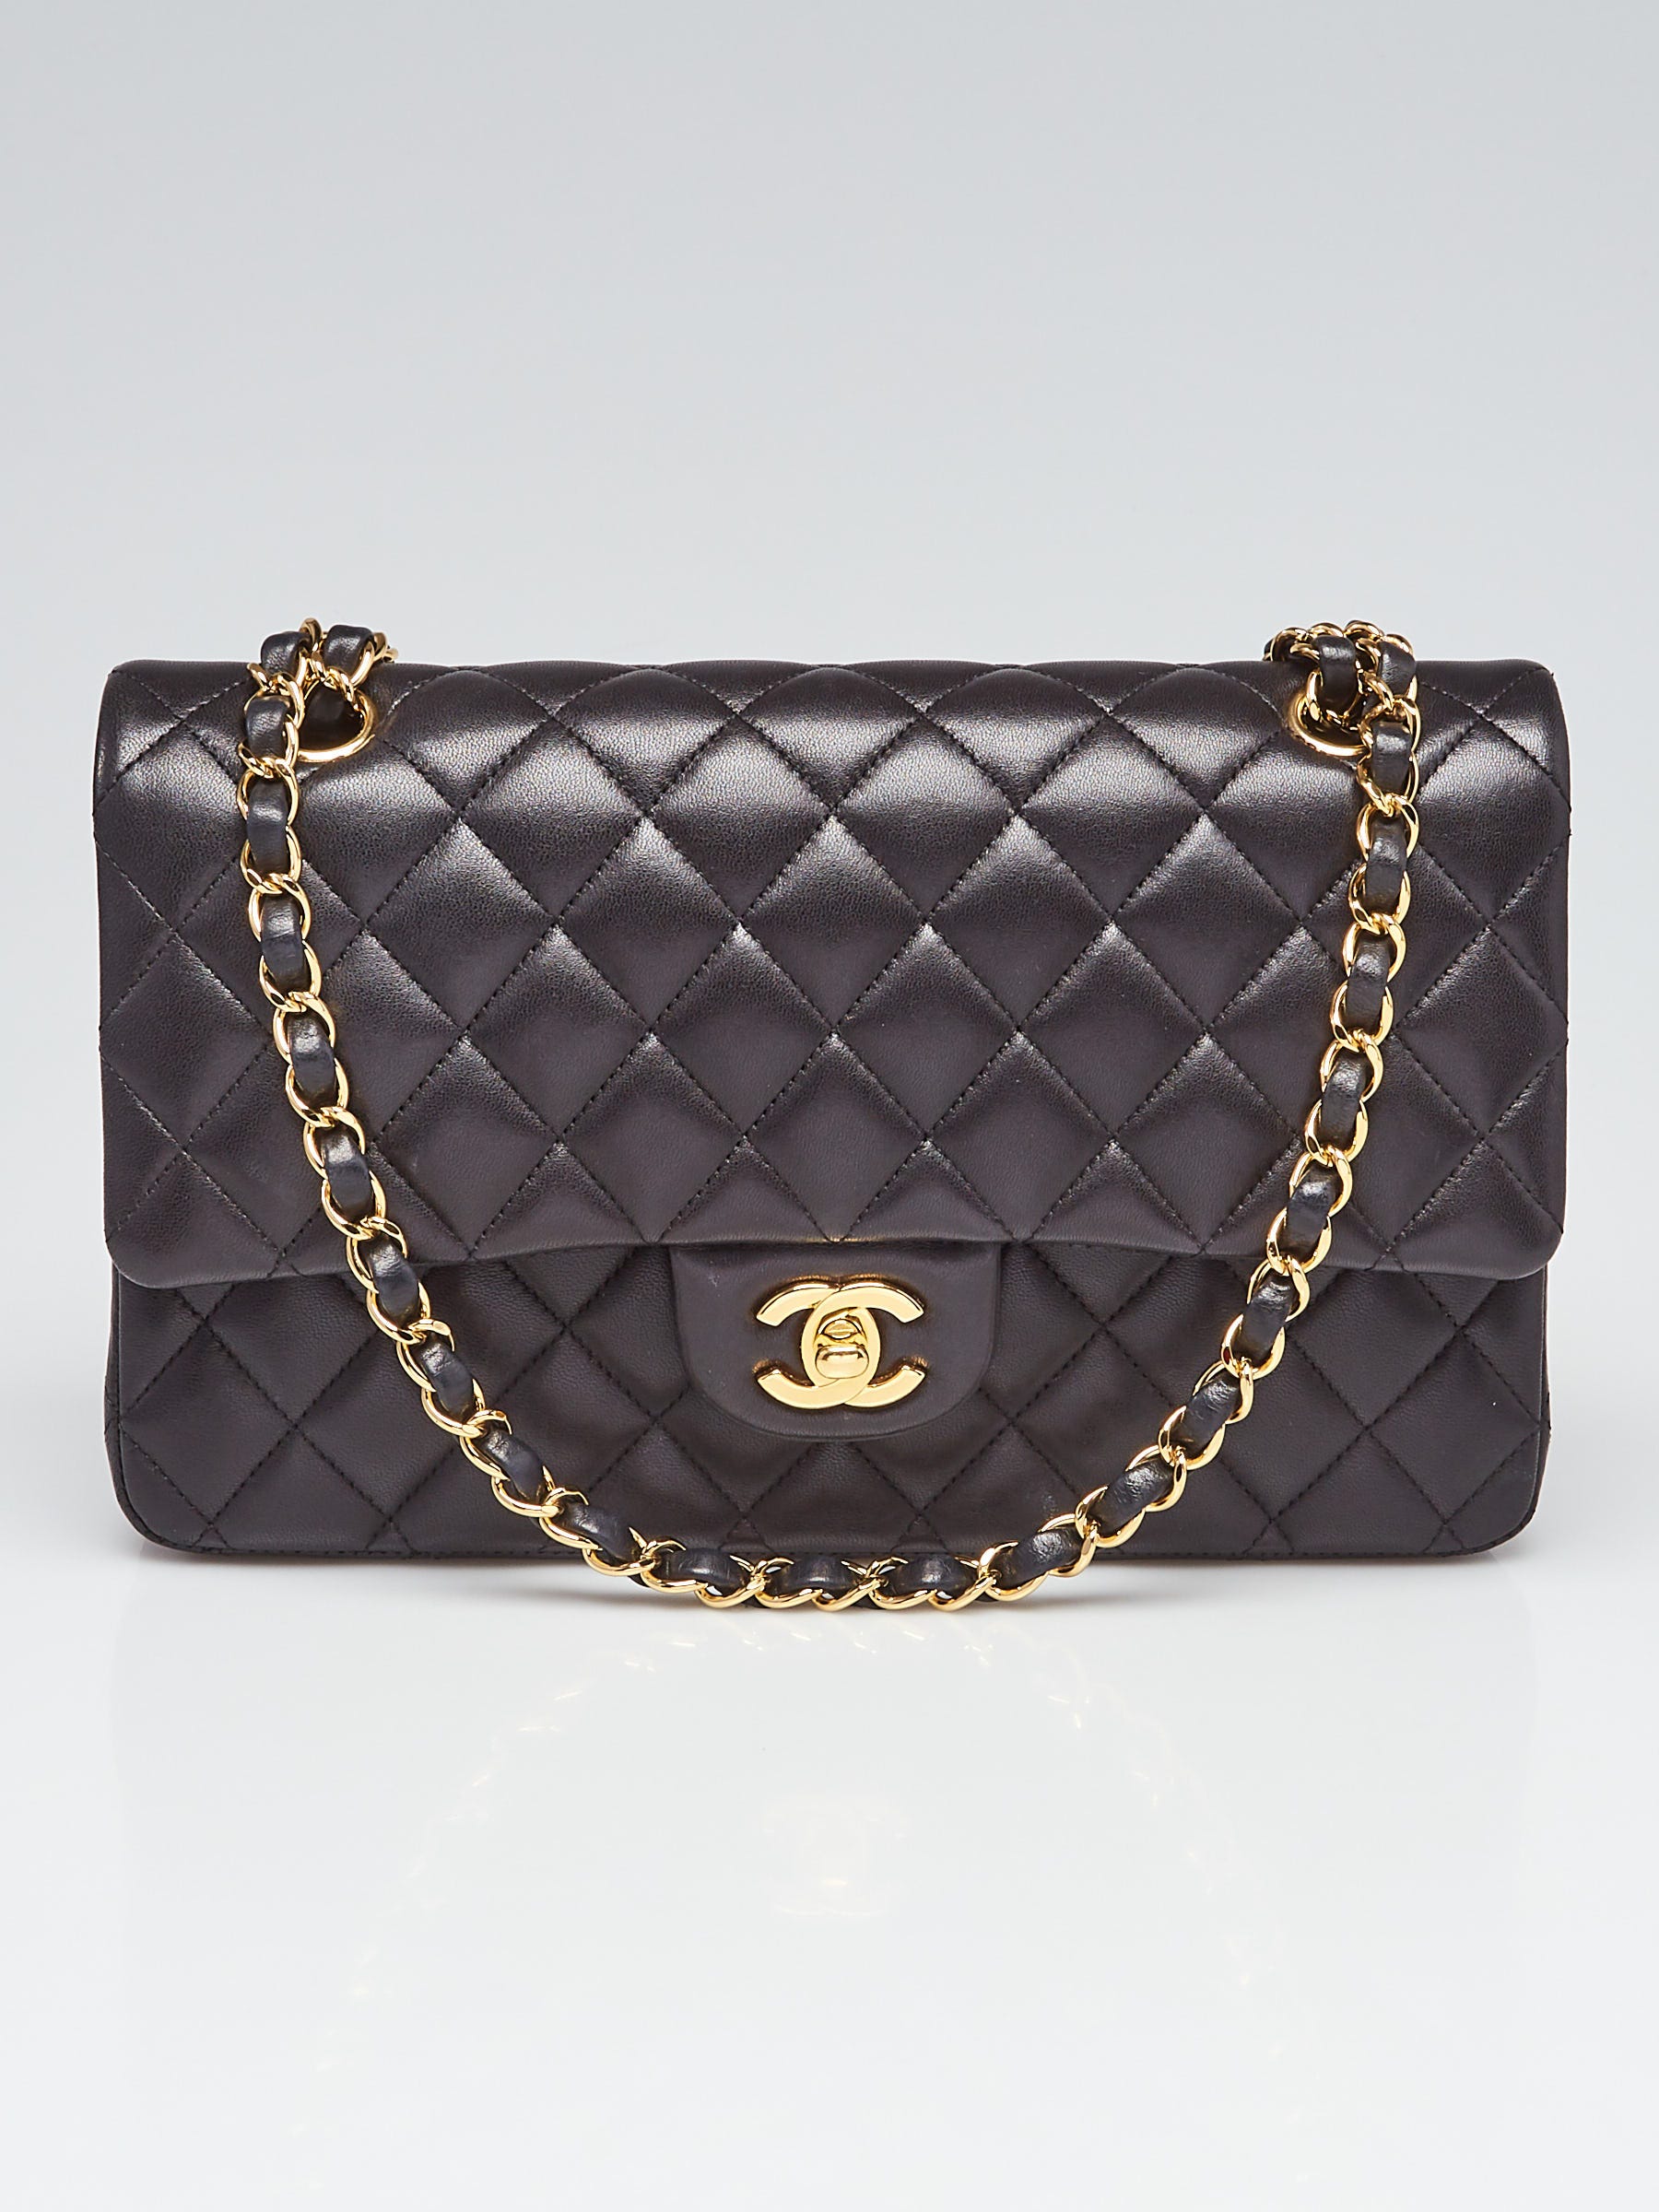 Chanel Black Quilted Lambskin Leather Classic Medium Double Flap